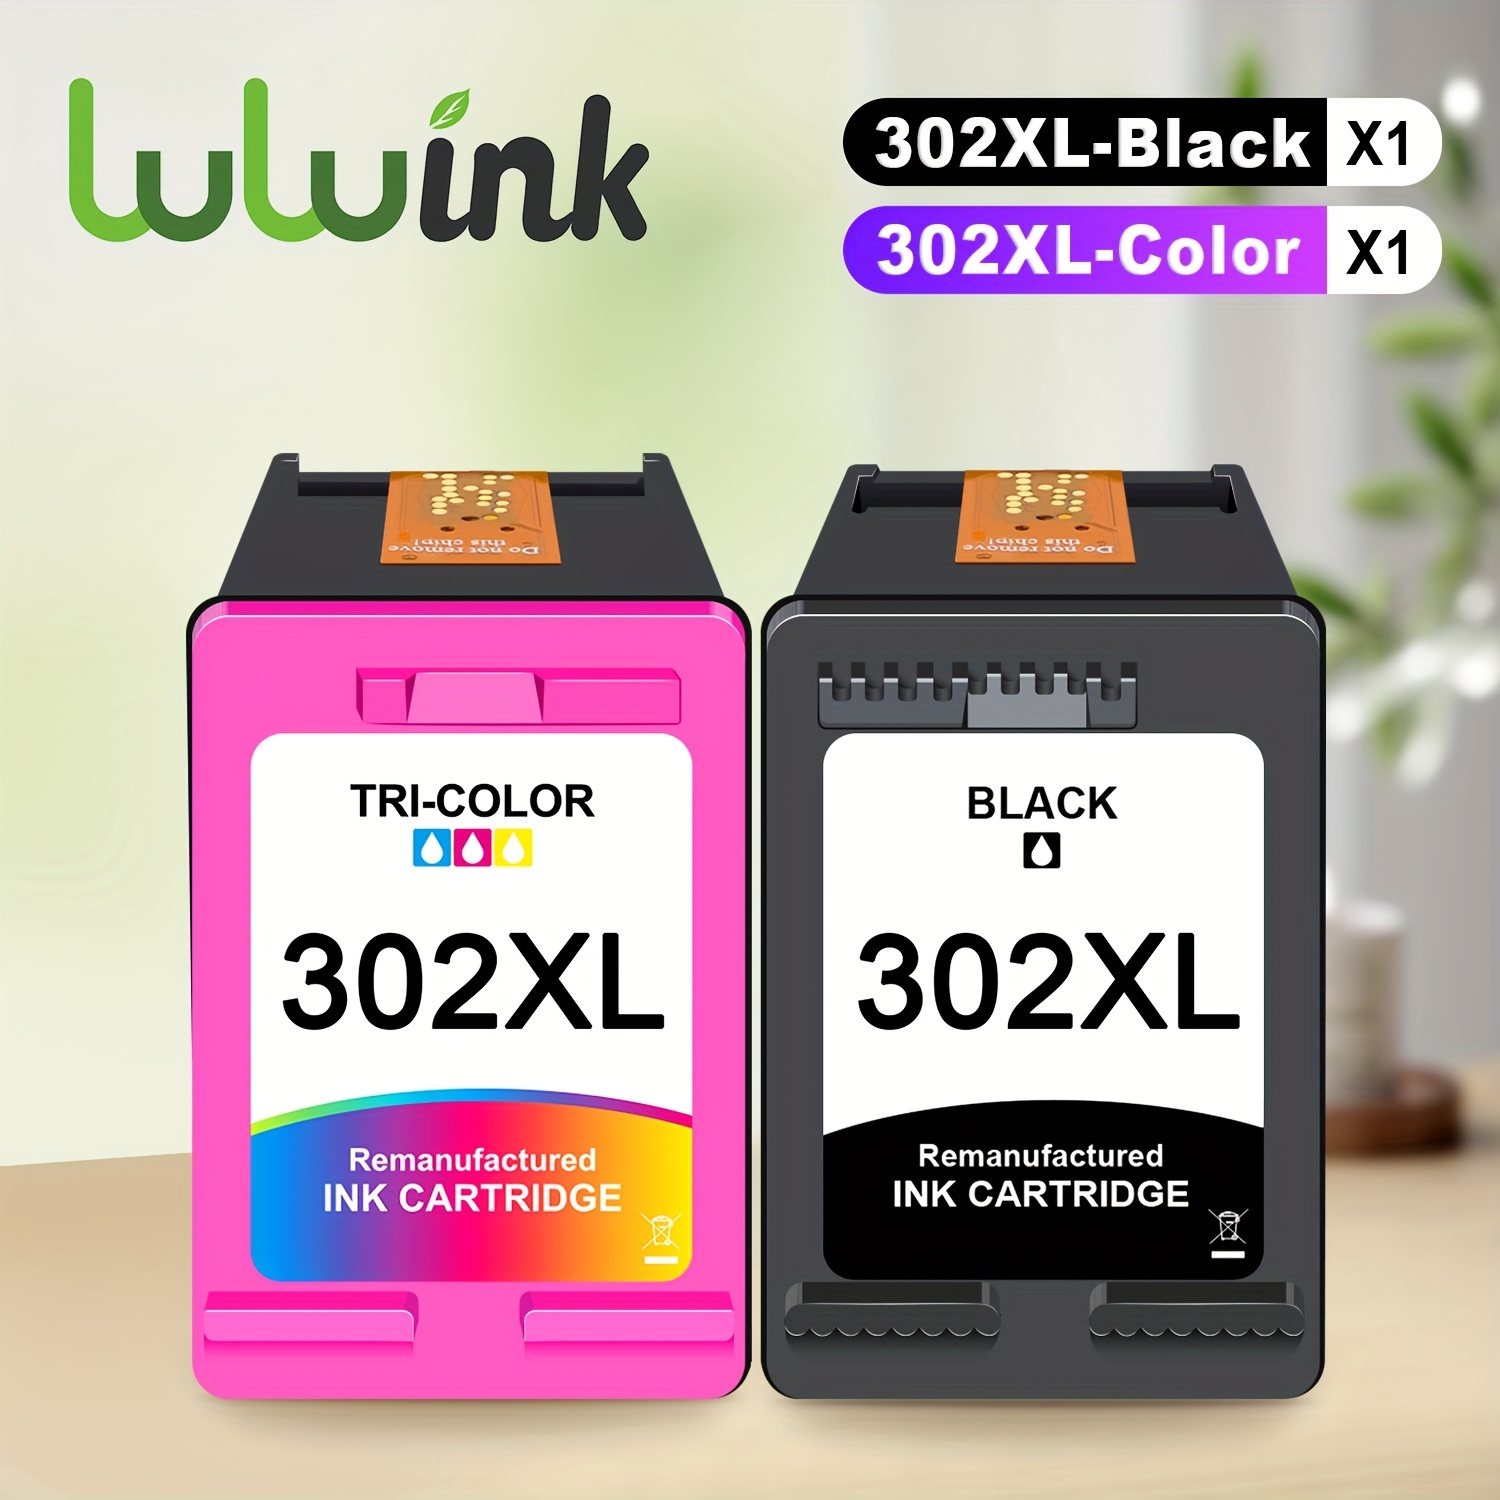 

cost-effective" High-yield 302xl Remanufactured Ink Cartridges - Black & Tri-color, Compatible With Hp Deskjet, Envy, Officejet Printers